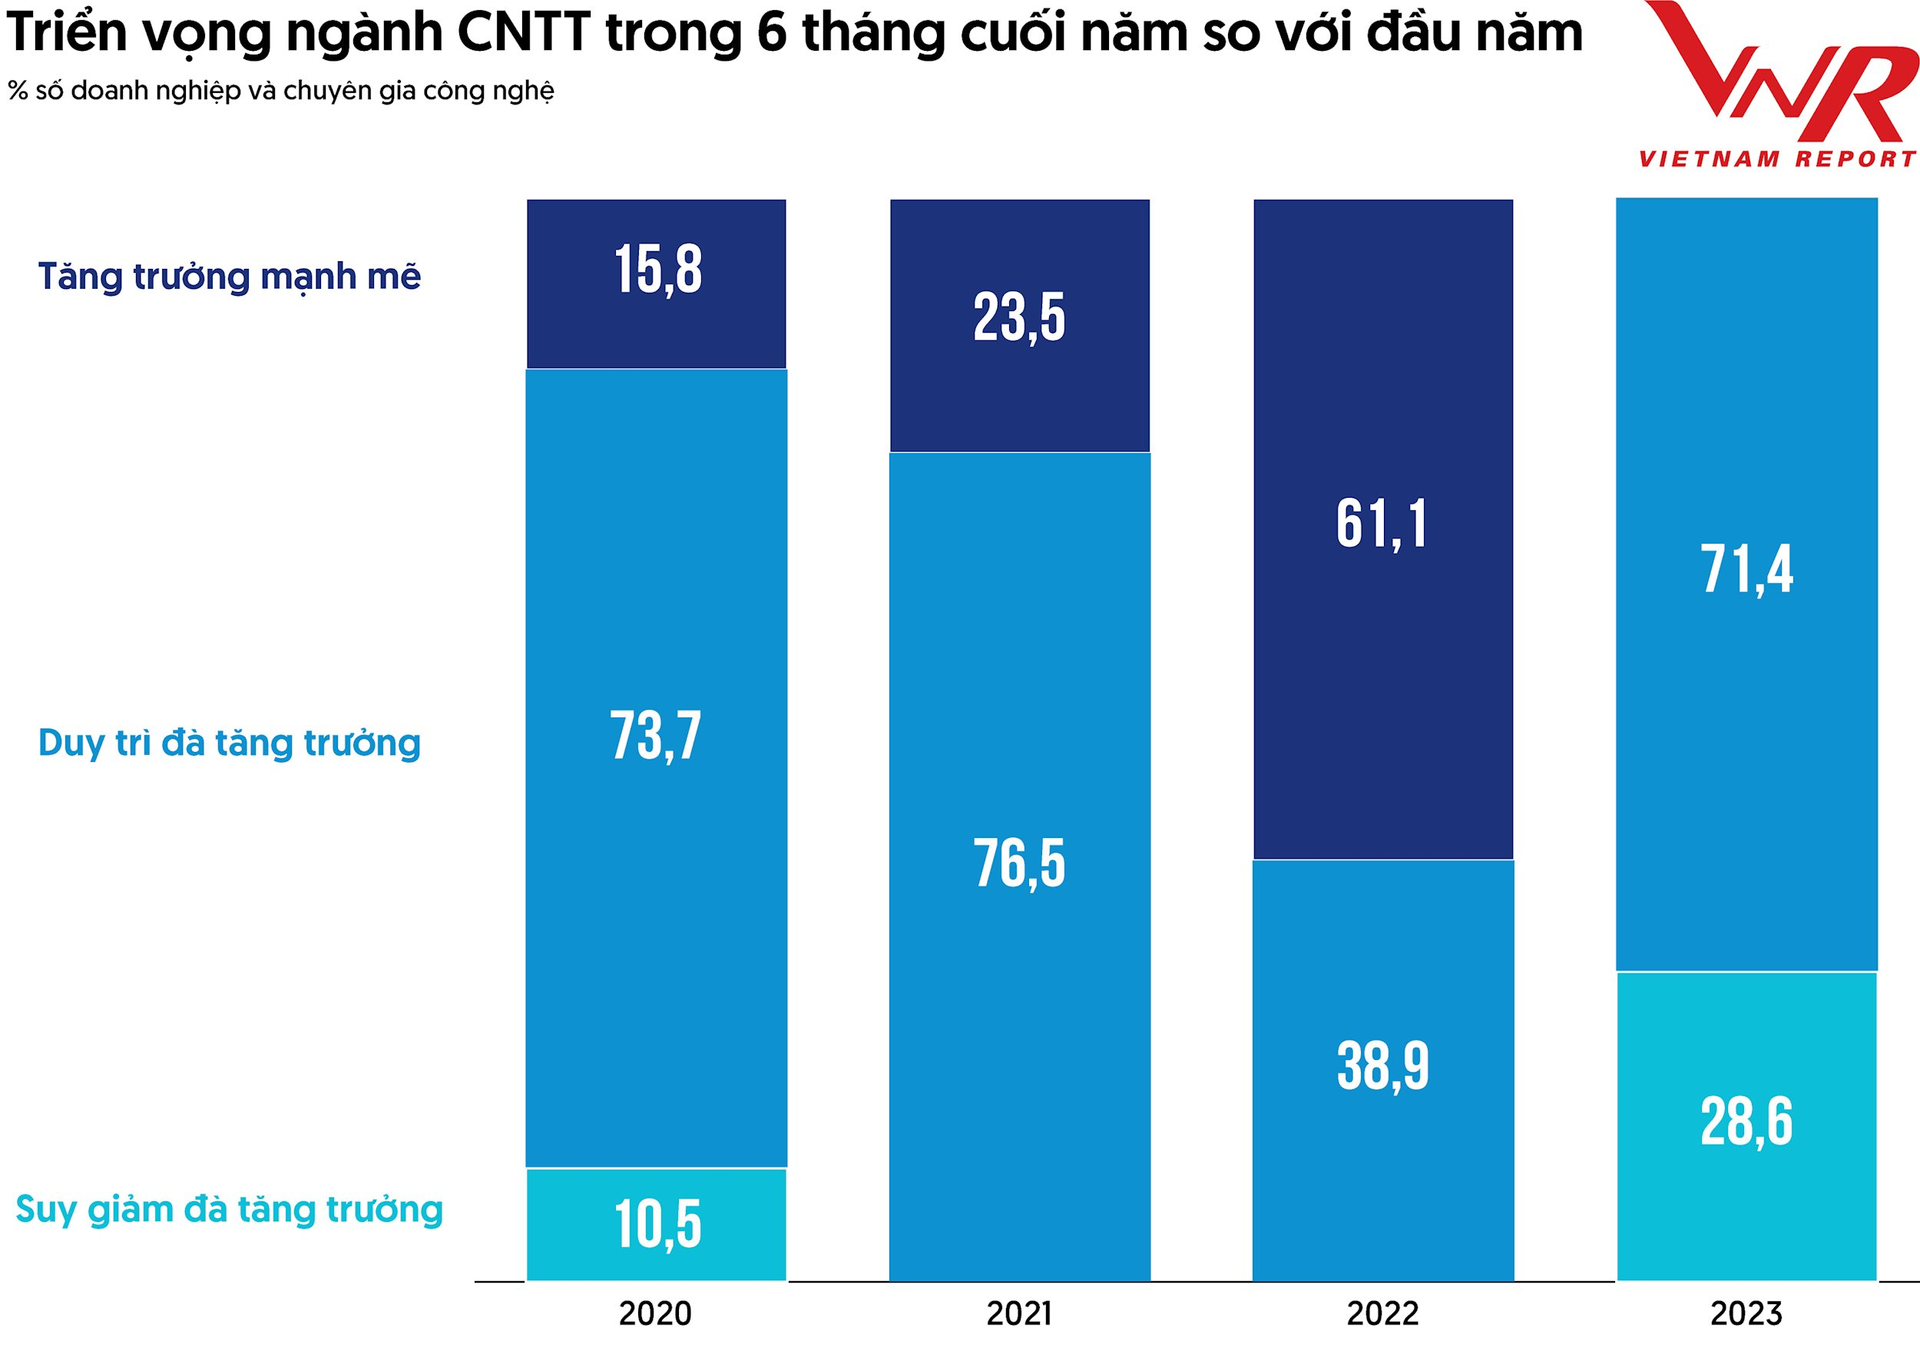 tcbc-top-10-cong-nghe-2023_final_hinh-1.png